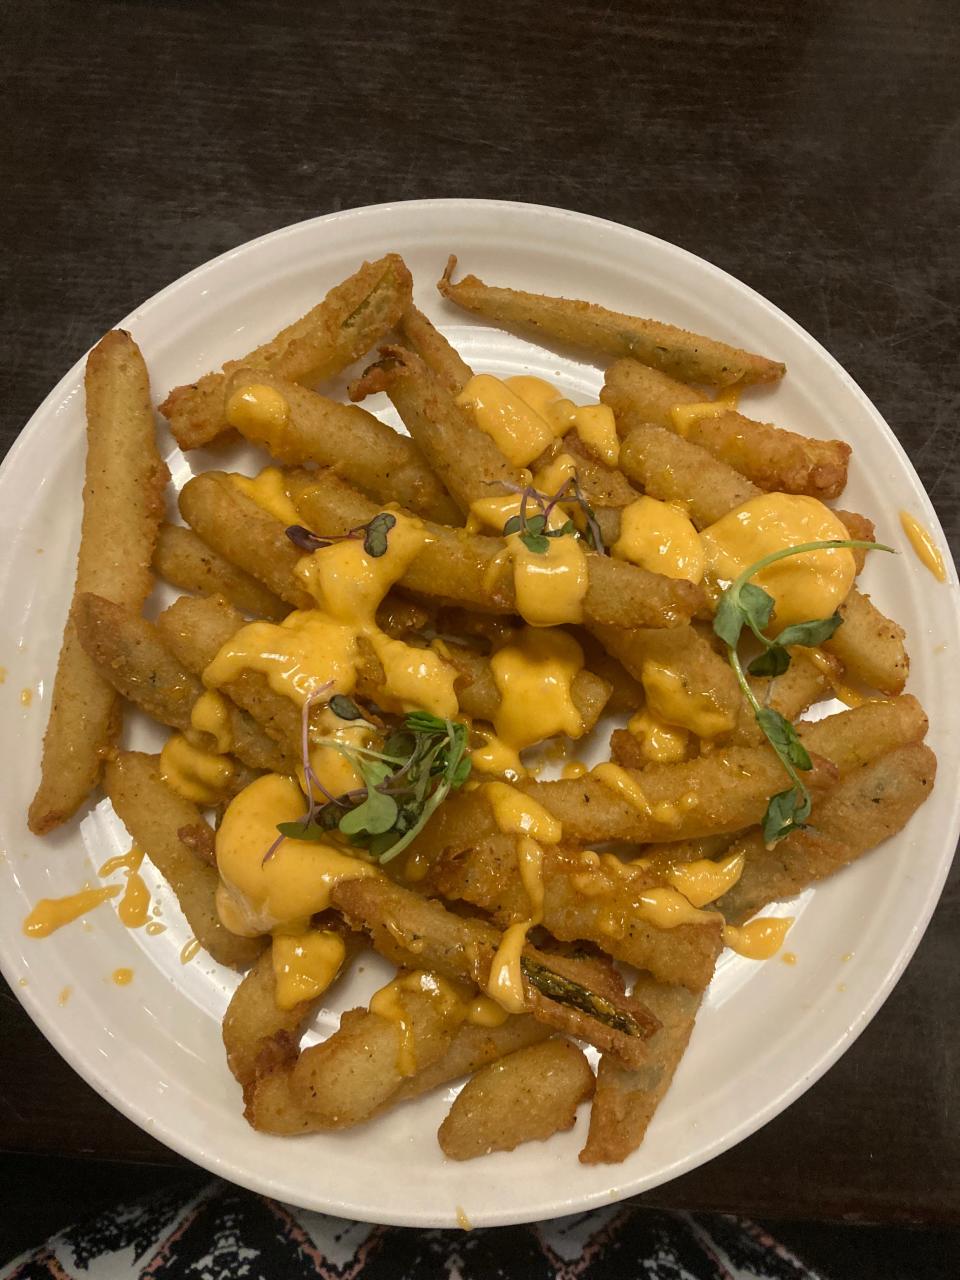 A plate of breaded pickle fries topped with a spicy aioli and microgreens.